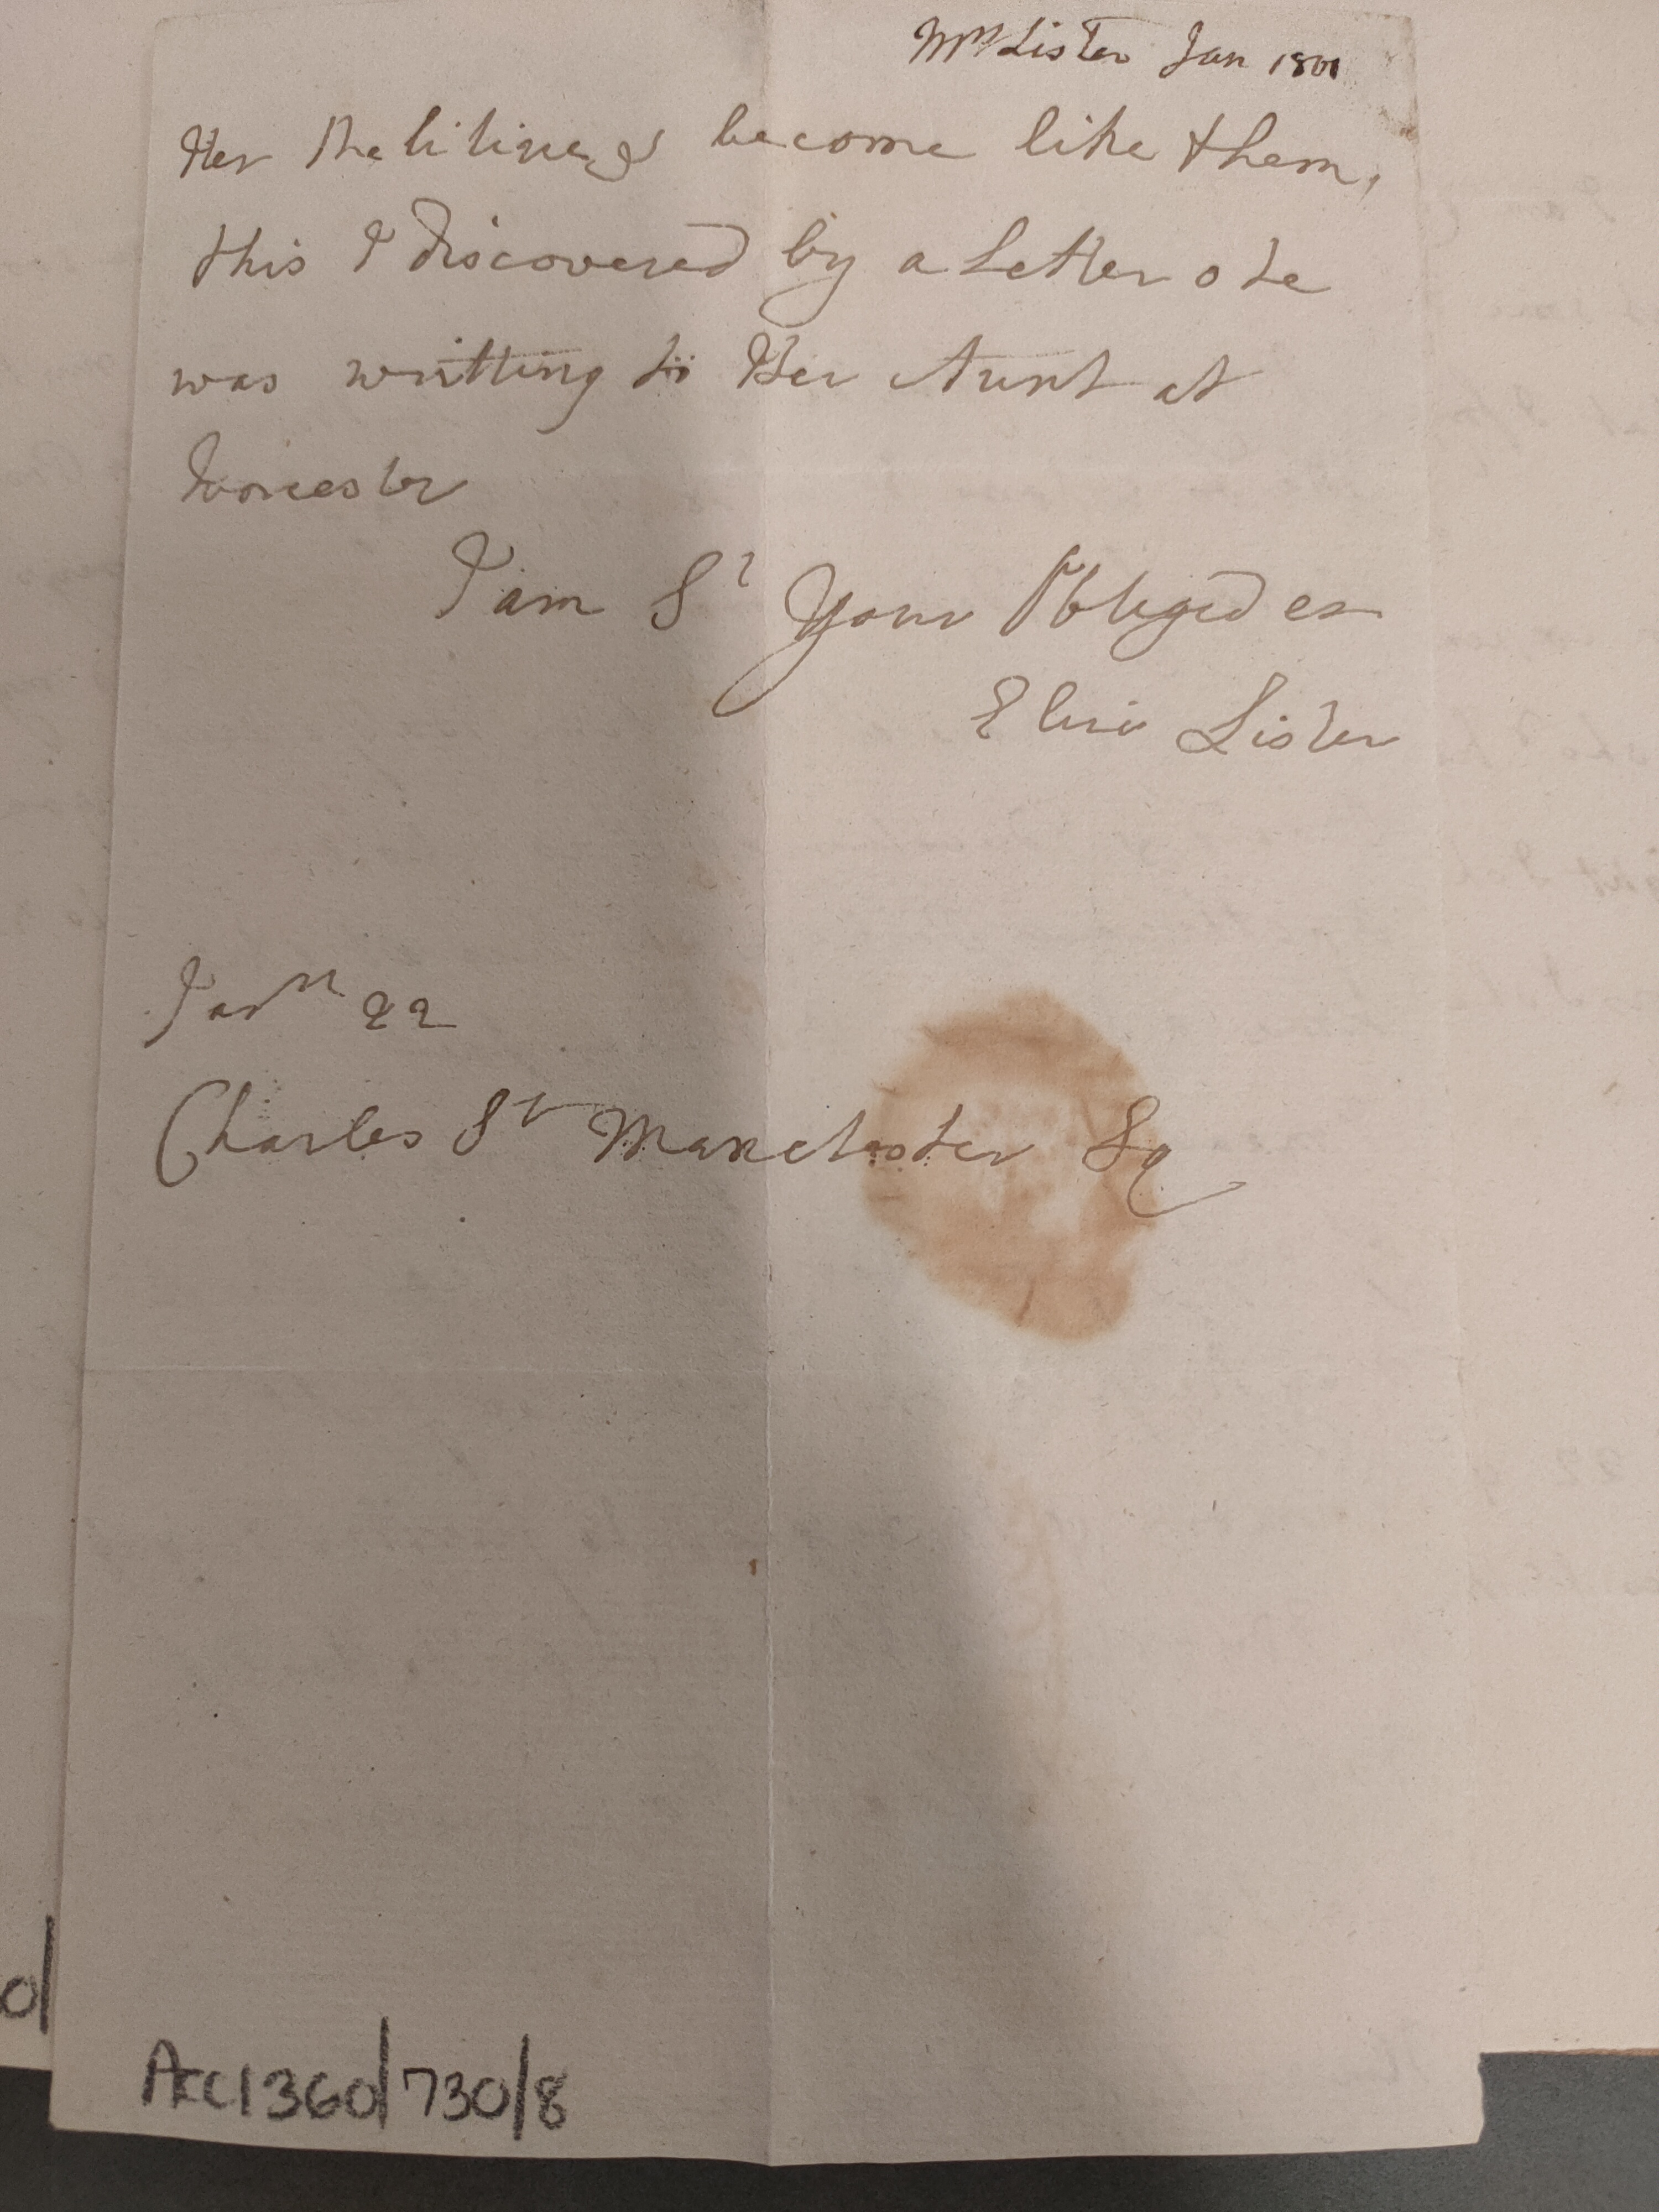 Image #2 of letter: Elizabeth Lister to [?Executors of Dr John Taylour’s will], 22 January 1801